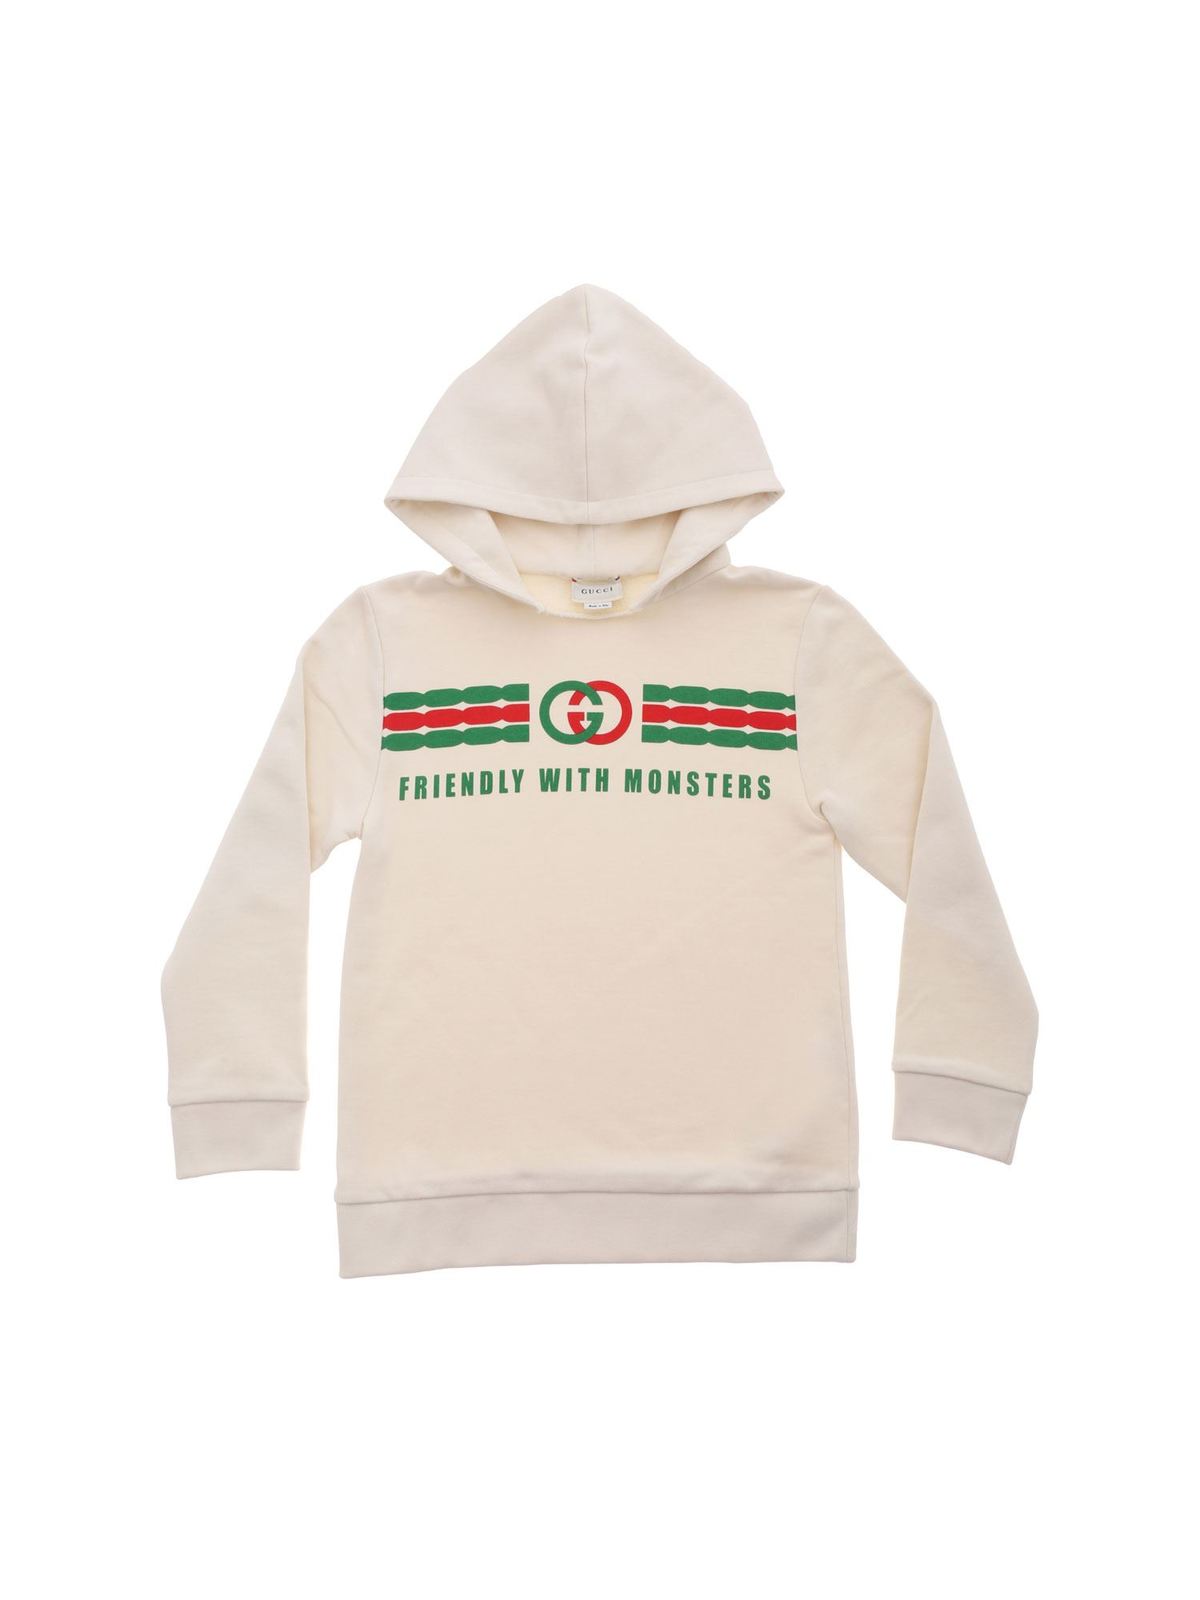 GUCCI LOGO HOODIE IN IVORY colour